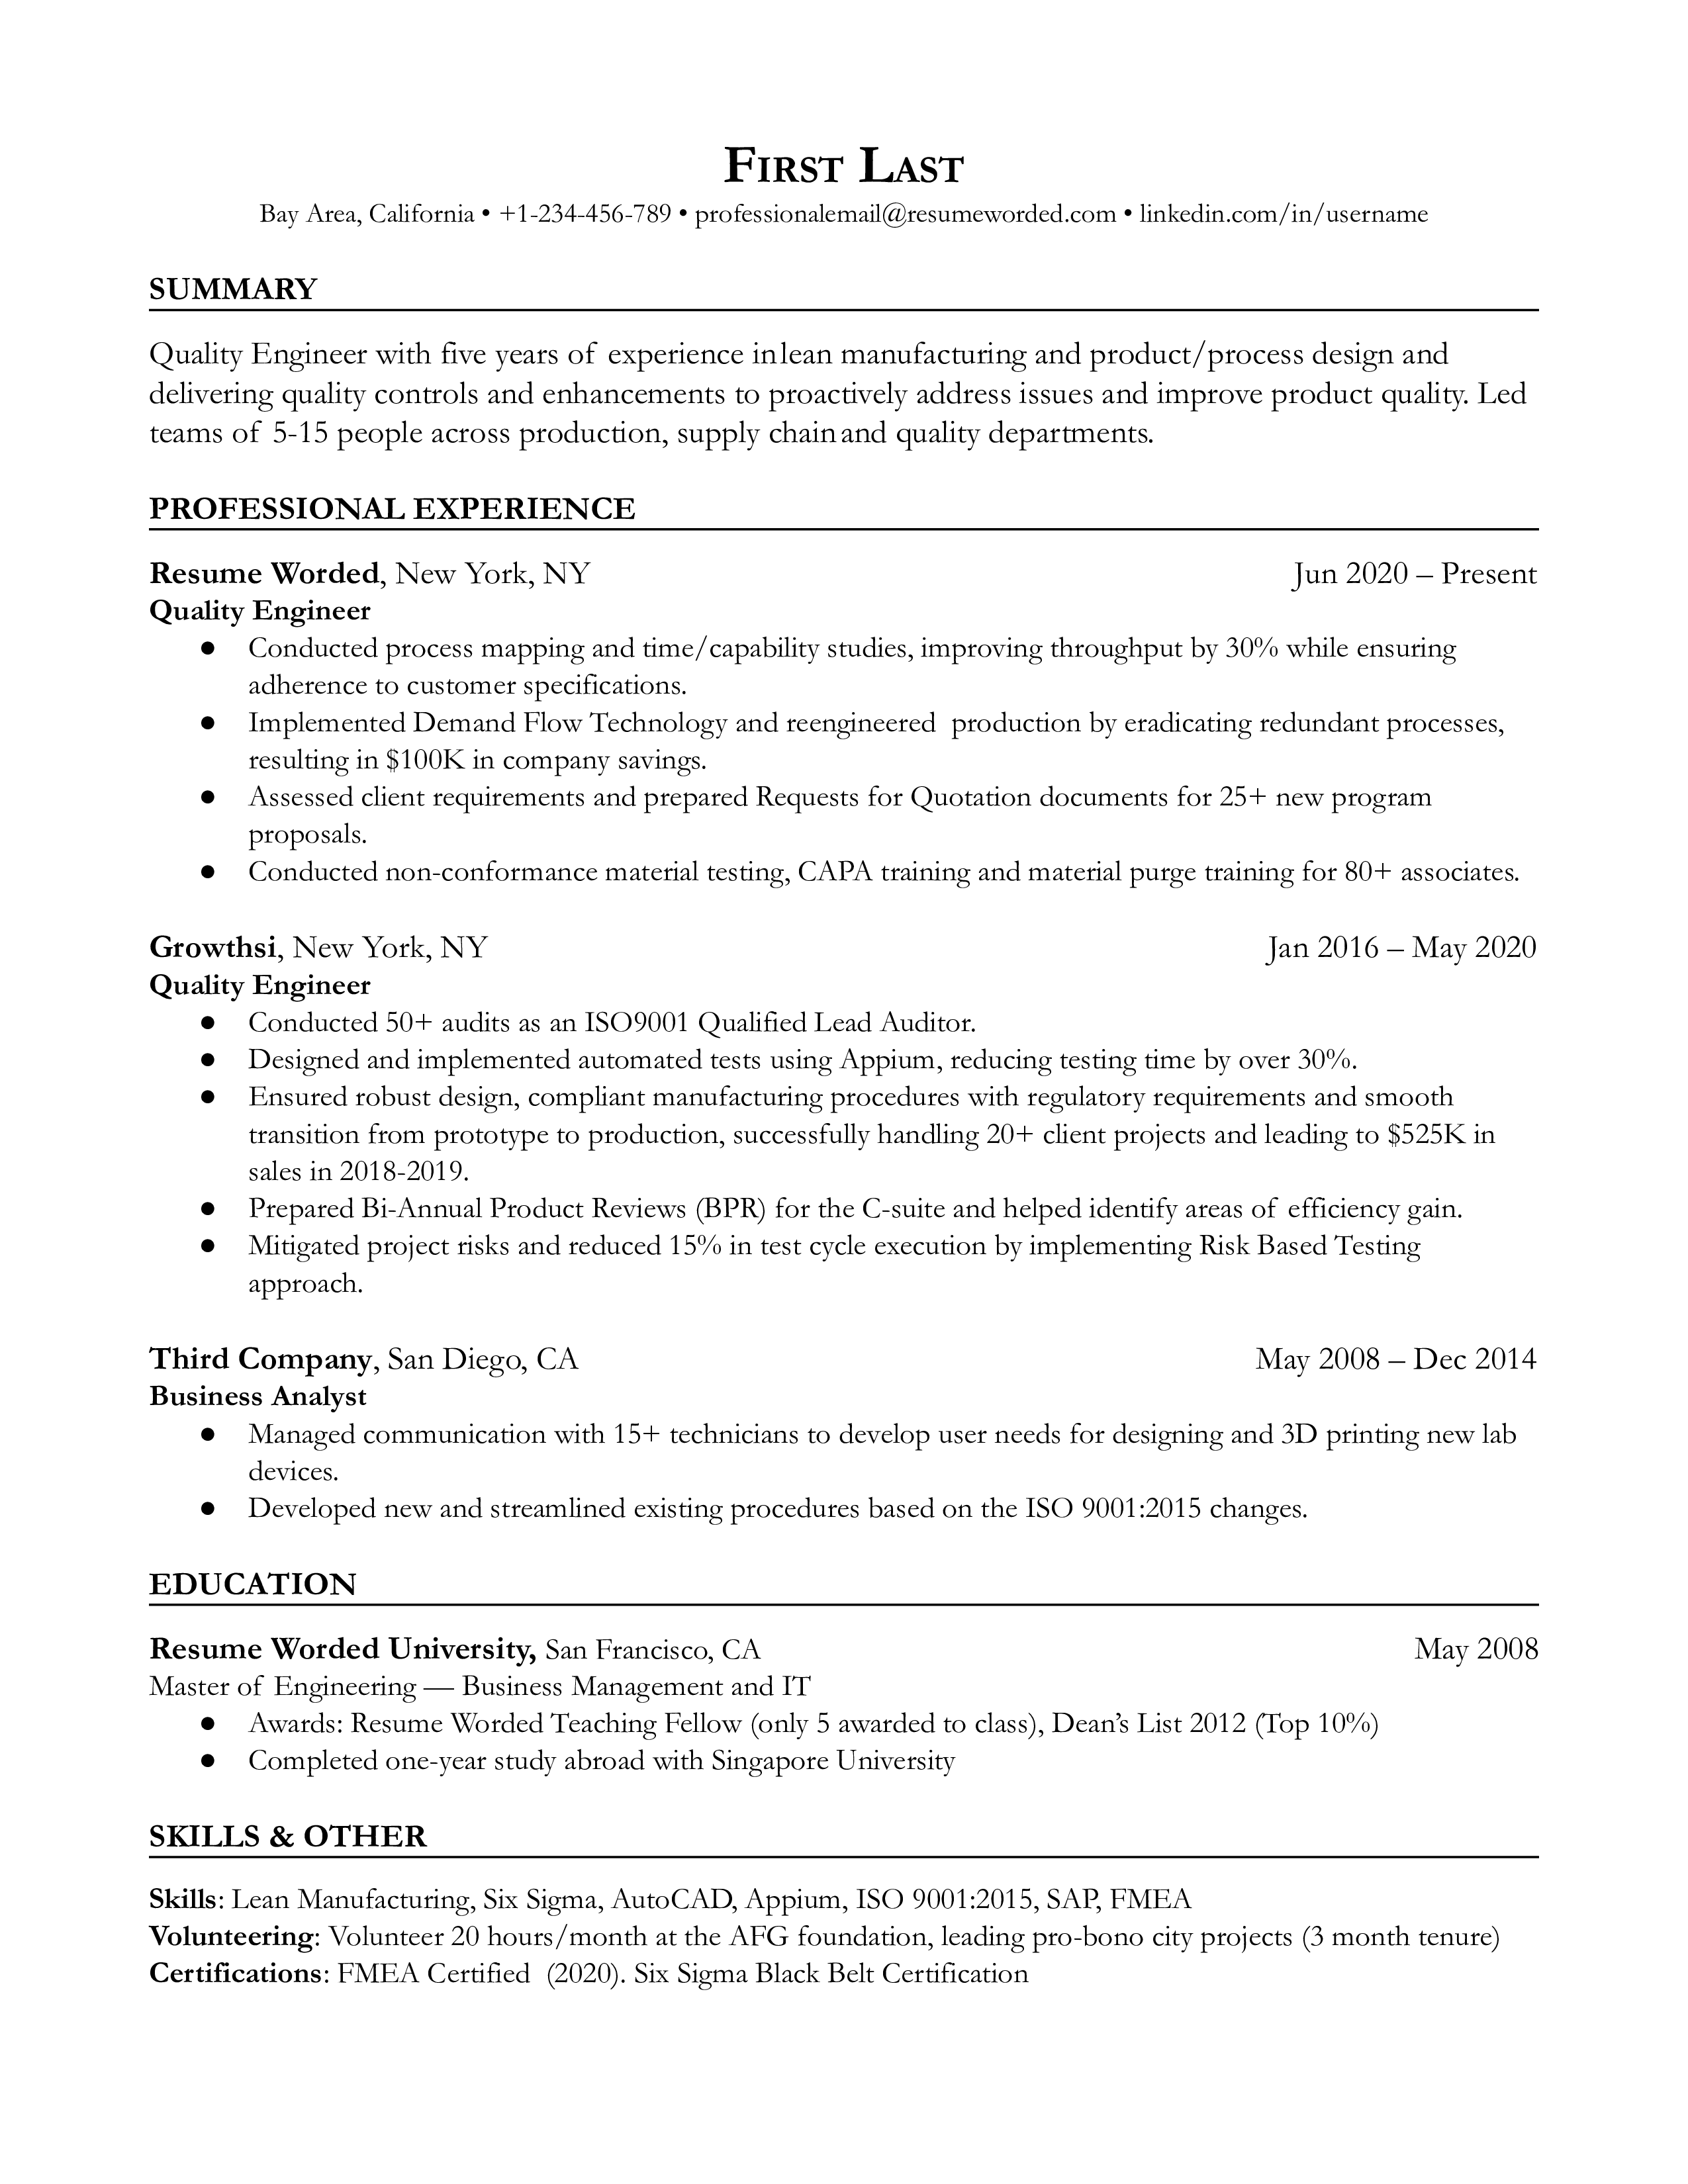 Detailed CV of a Quality Engineer showcasing technical skills and continuous improvement initiatives.